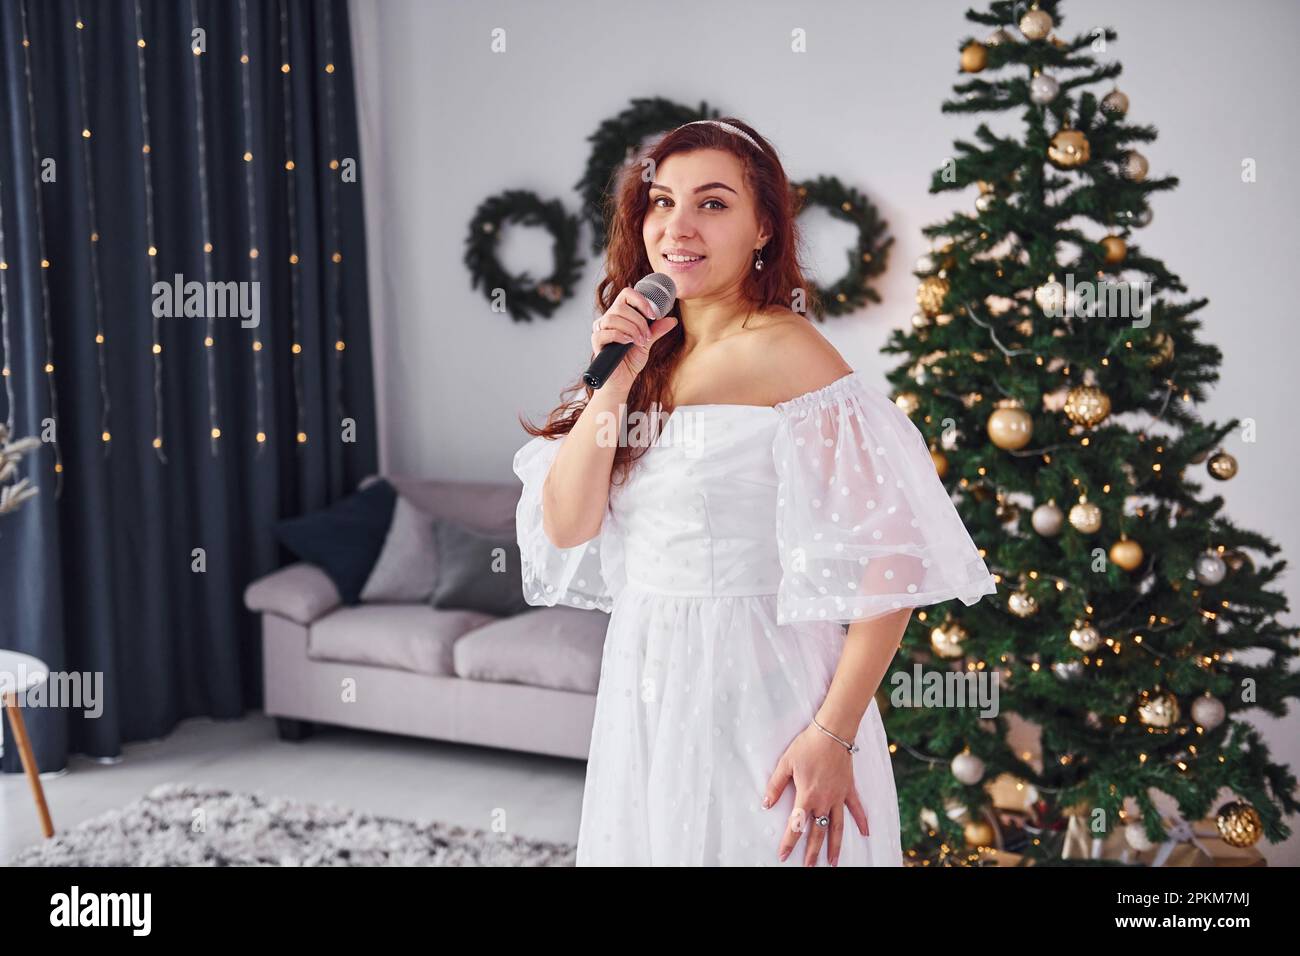 Standing in the christmas decorated domestic room. Woman in white dress and with microphone in hands is singing in the . Stock Photo